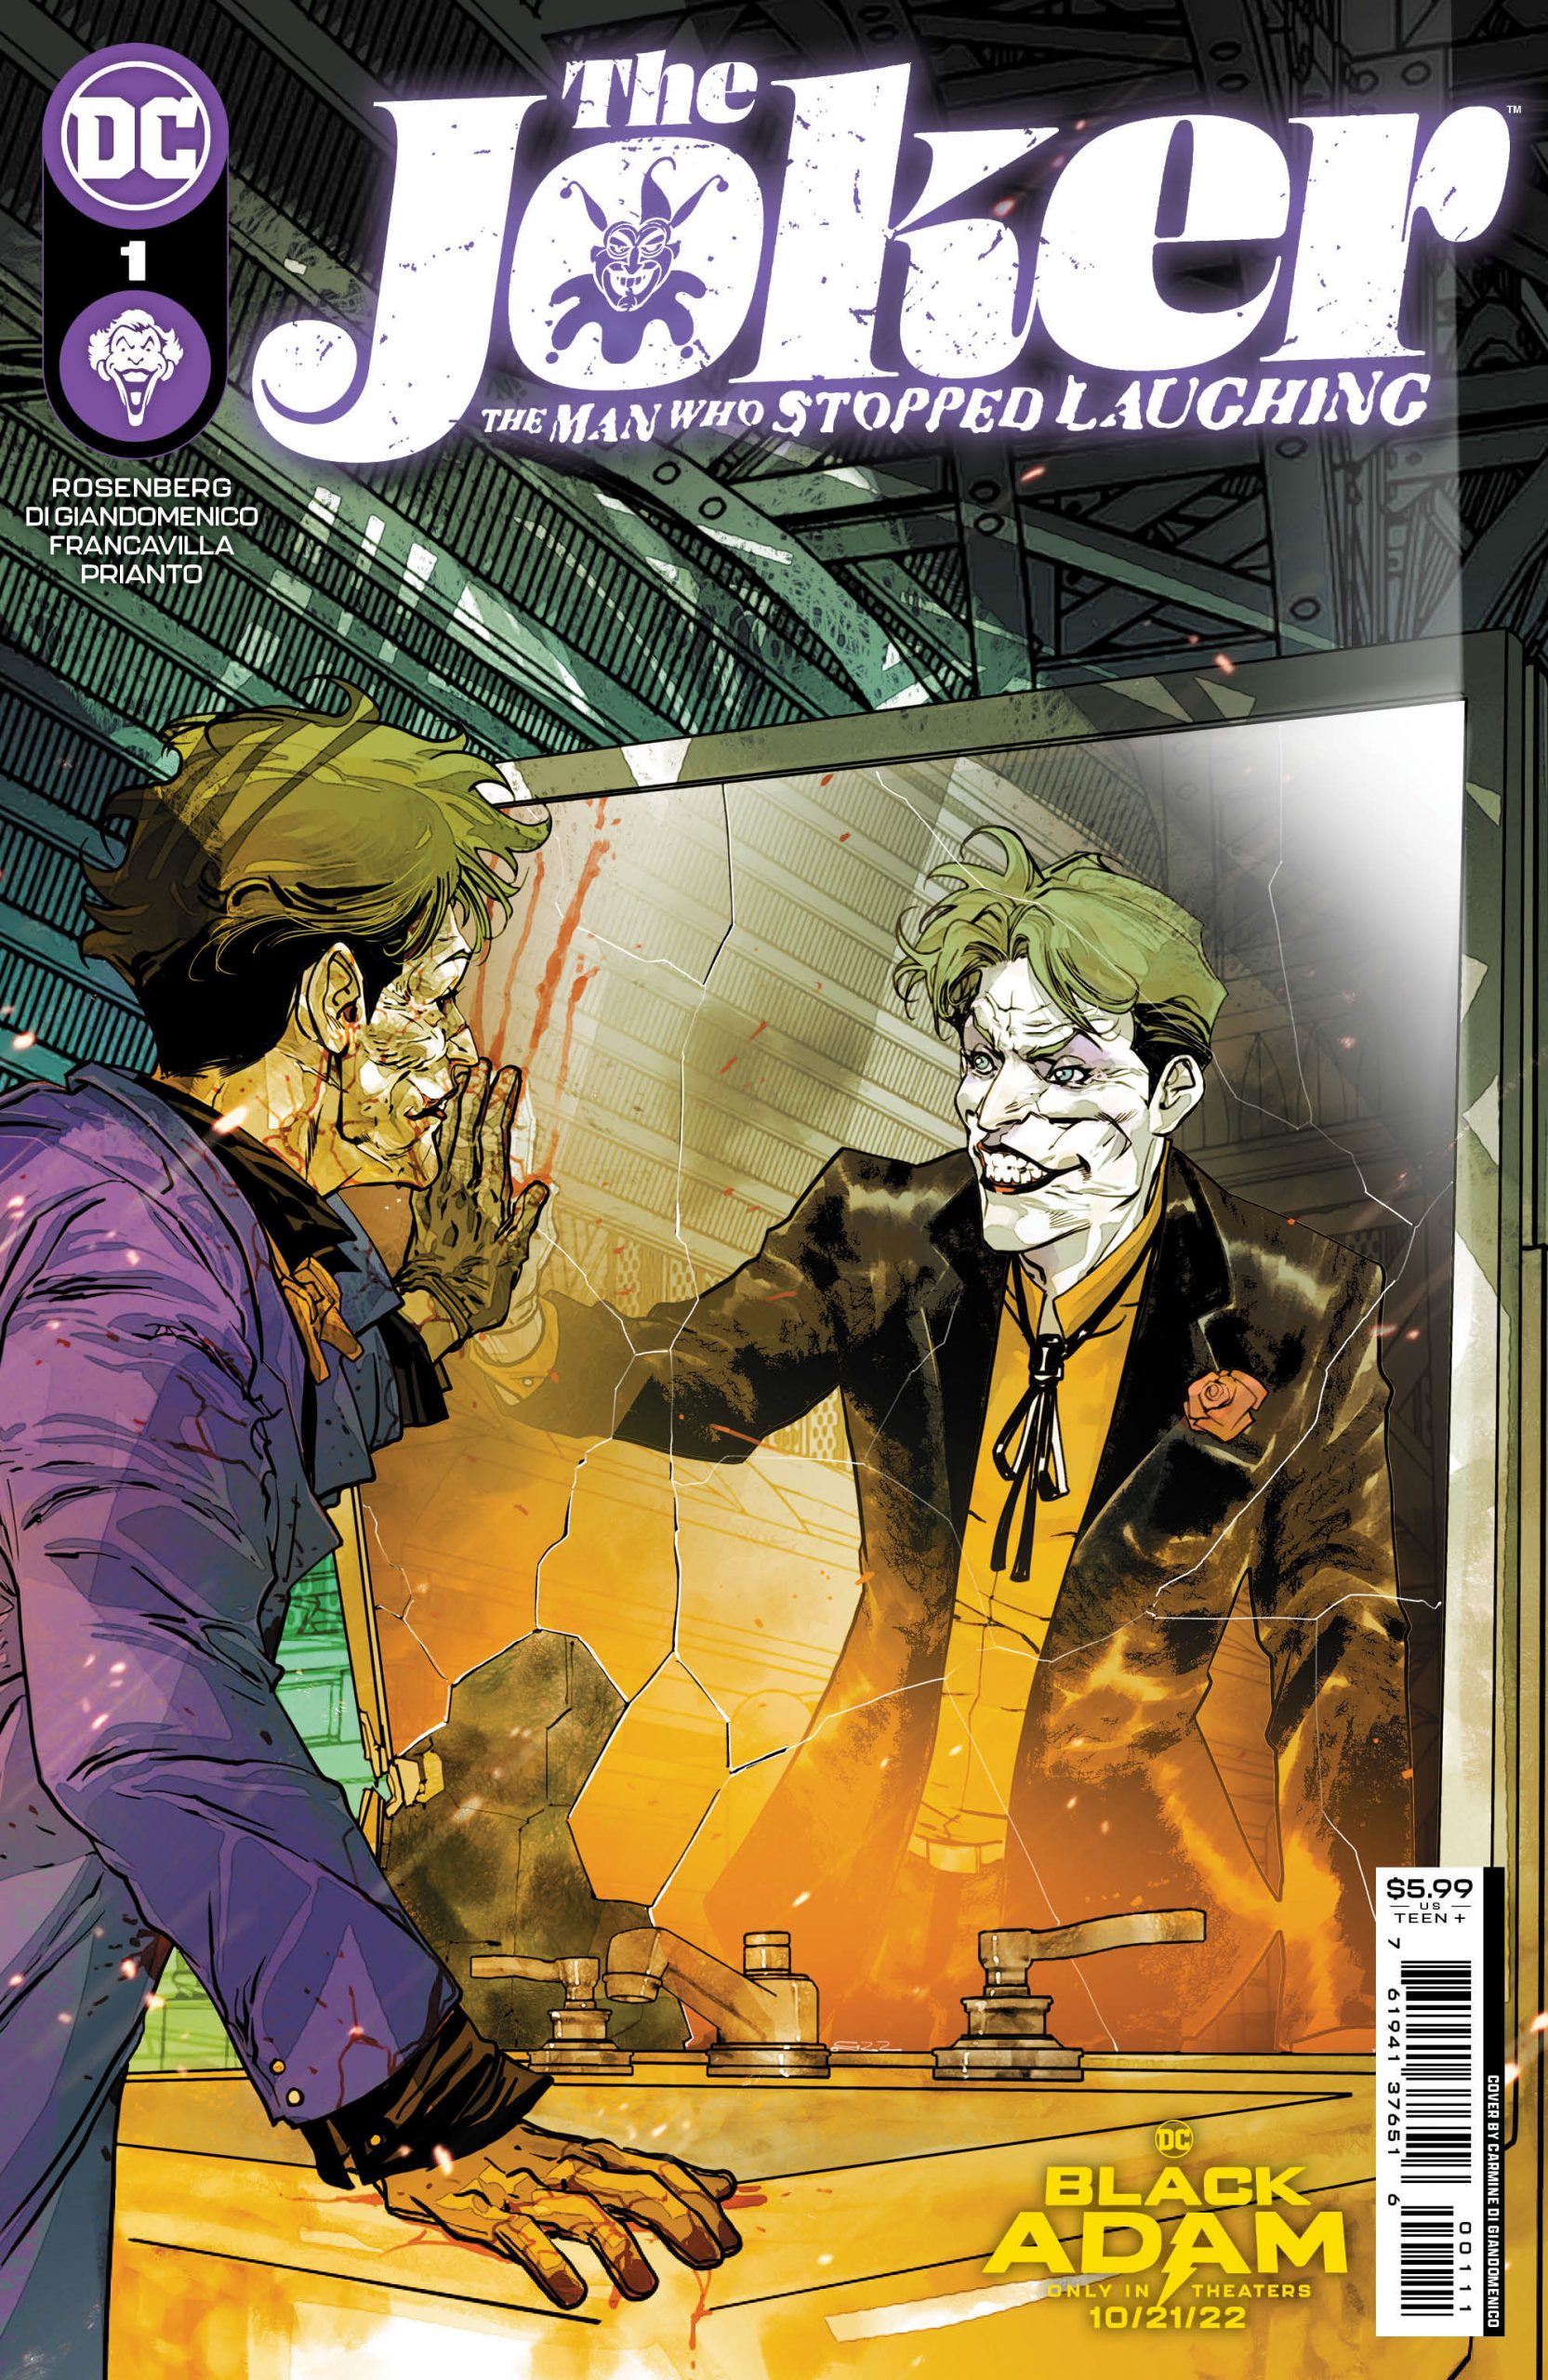 DC Preview: The Joker: The Man Who Stopped Laughing #1